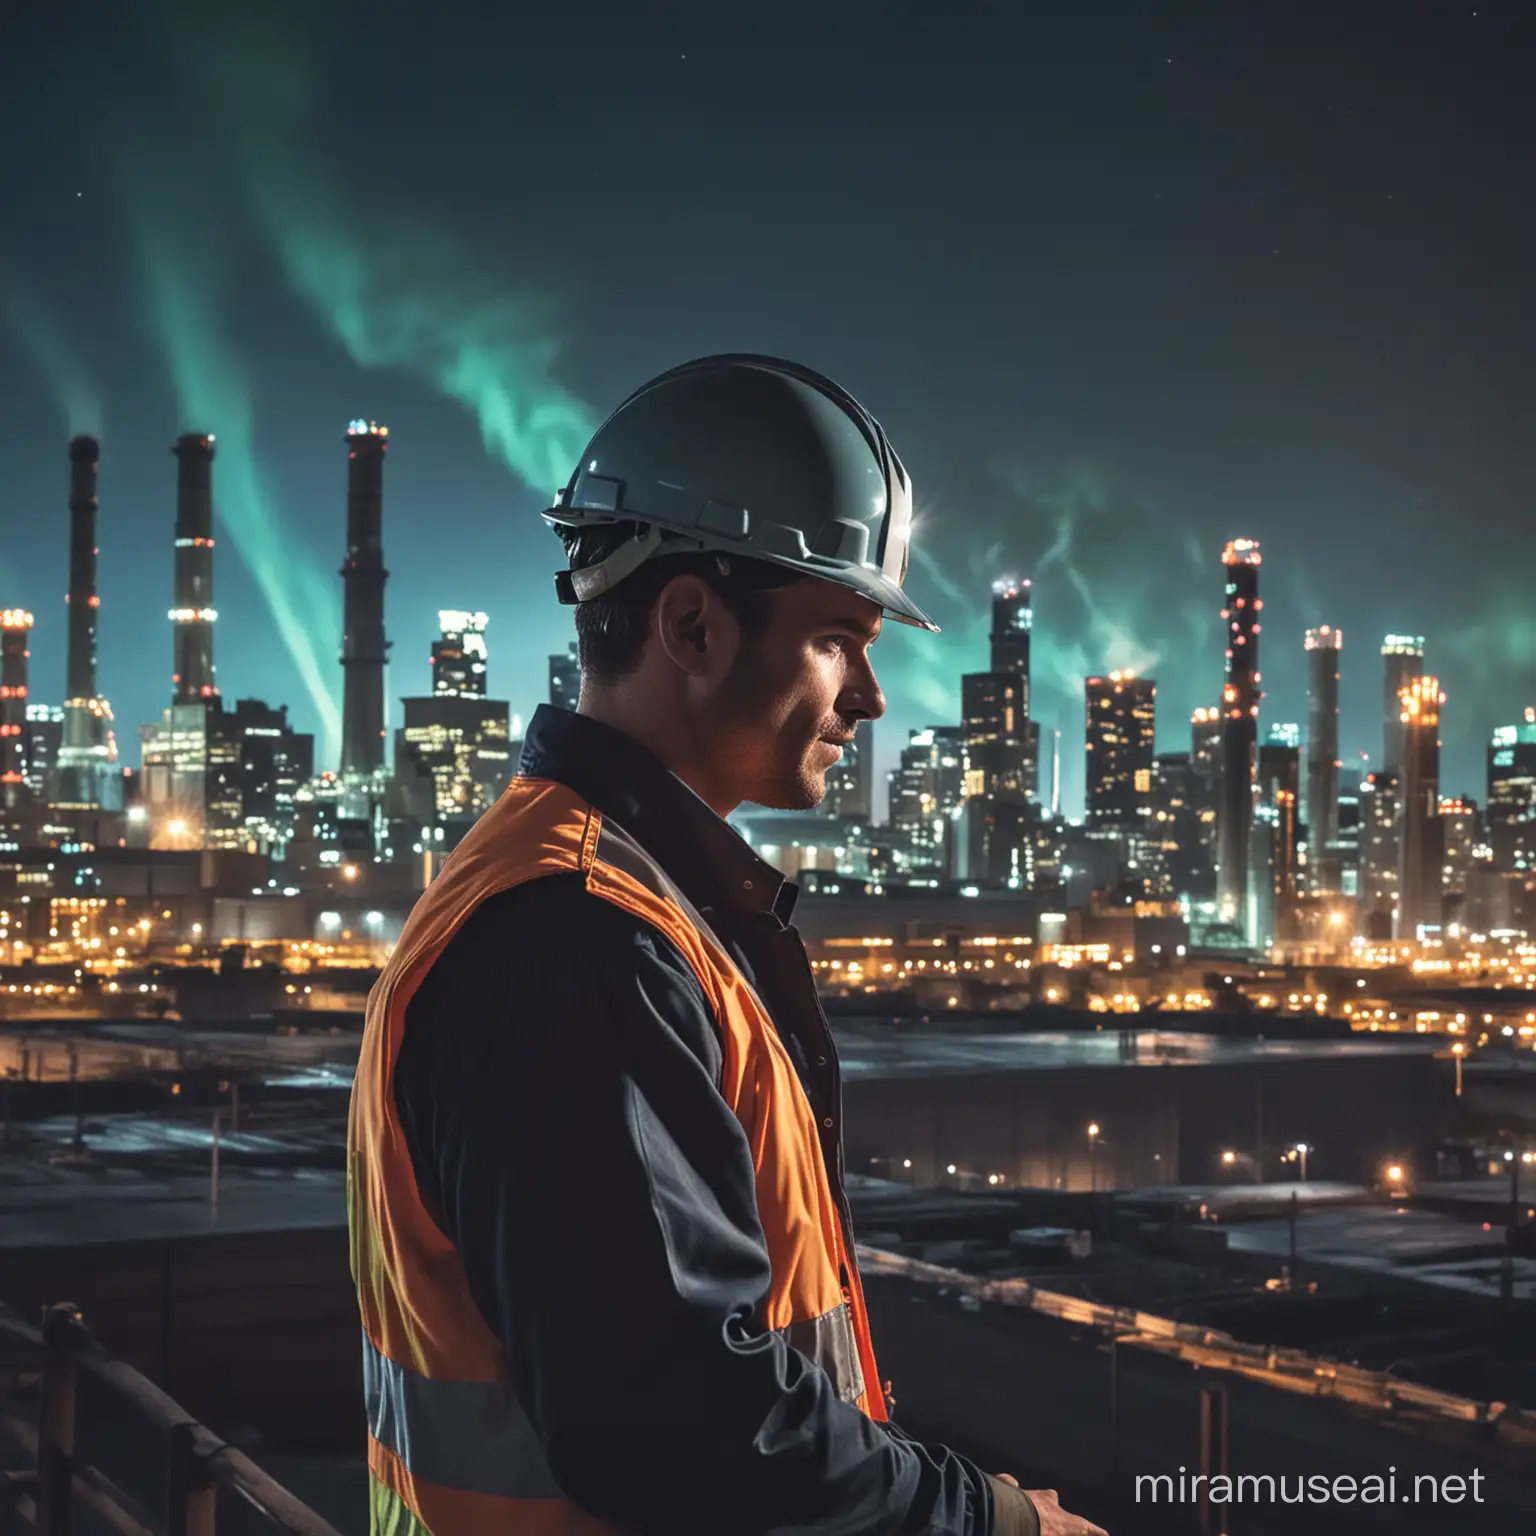  Oiler,  The image shows a man wearing a hard hat working in a factory. He is dressed in workwear and appears to be a blue-collar worker or technician in an industrial setting.The image shows a city skyline at night with lights in the sky resembling an aurora. It features skyscrapers, city lights, and a green outdoor setting.